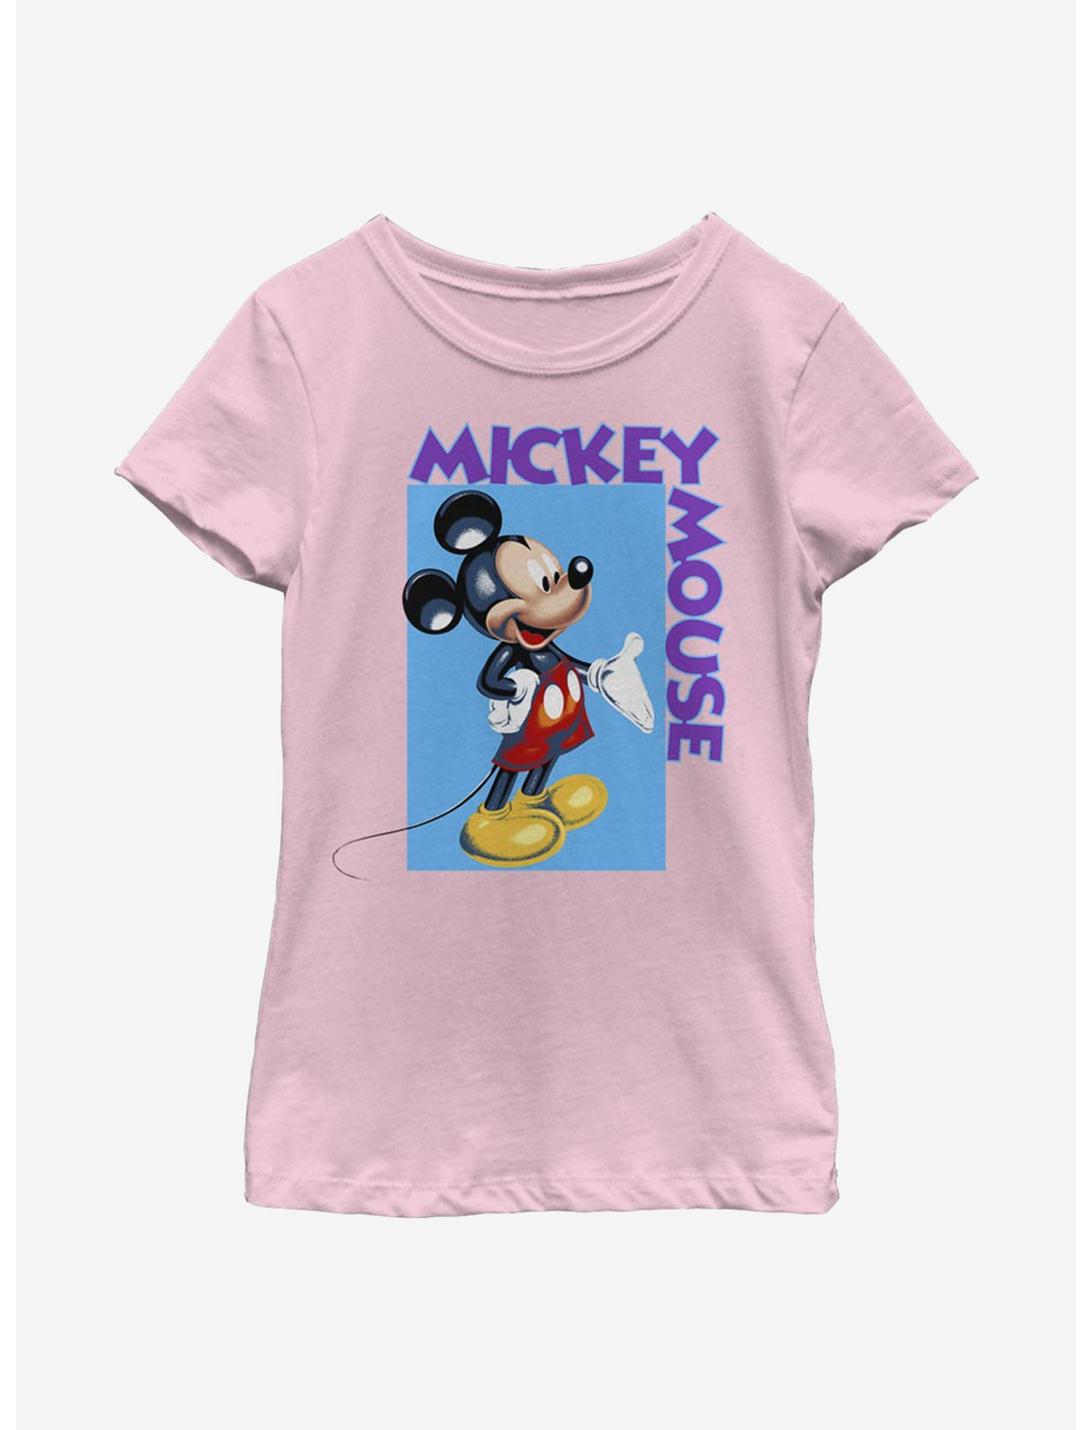 Disney Mickey Mouse Youth Girls T-Shirt, PINK, hi-res